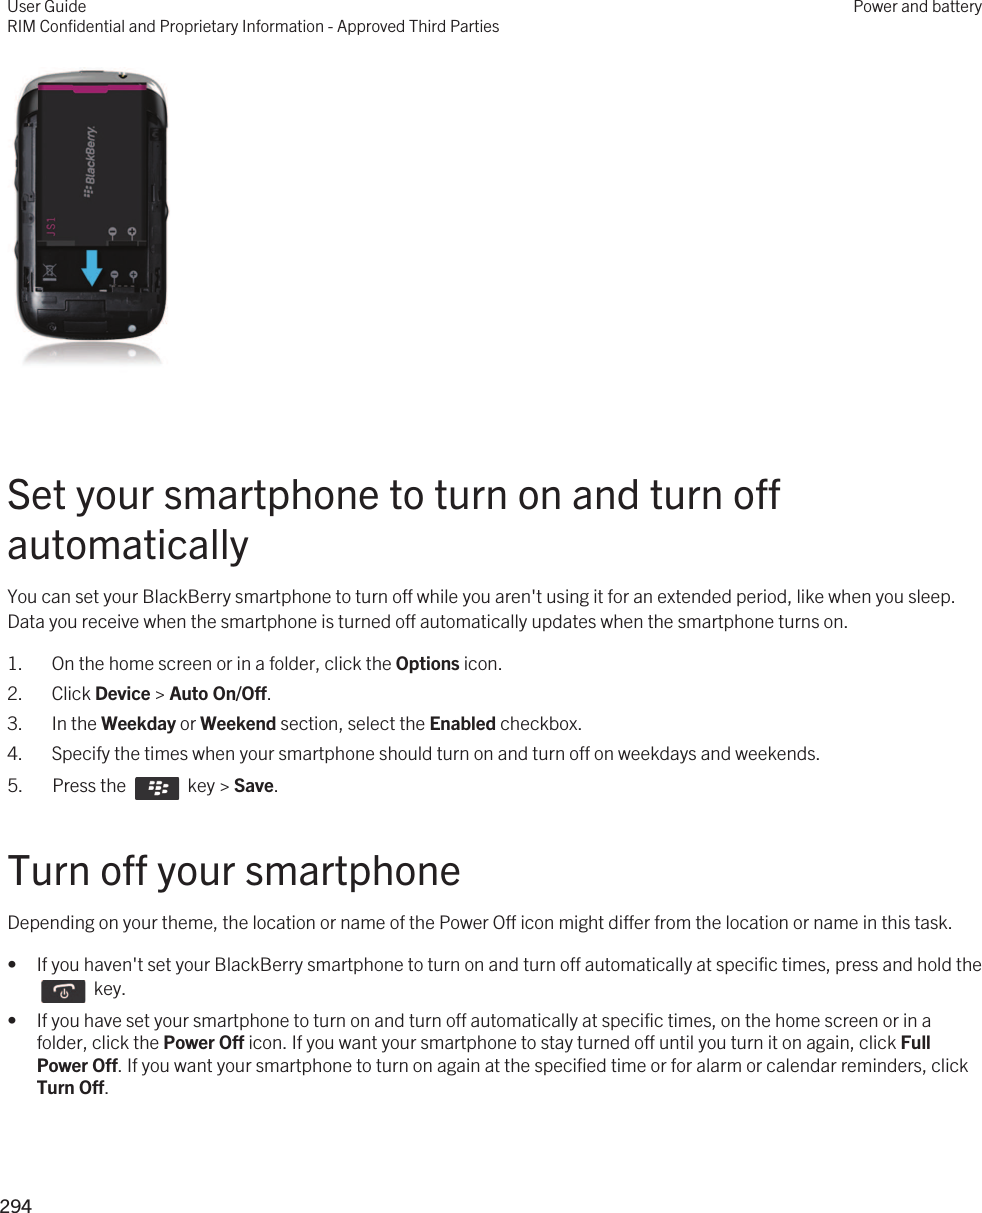  Set your smartphone to turn on and turn off automaticallyYou can set your BlackBerry smartphone to turn off while you aren&apos;t using it for an extended period, like when you sleep. Data you receive when the smartphone is turned off automatically updates when the smartphone turns on.1. On the home screen or in a folder, click the Options icon.2. Click Device &gt; Auto On/Off.3. In the Weekday or Weekend section, select the Enabled checkbox.4. Specify the times when your smartphone should turn on and turn off on weekdays and weekends.5.  Press the    key &gt; Save. Turn off your smartphoneDepending on your theme, the location or name of the Power Off icon might differ from the location or name in this task.• If you haven&apos;t set your BlackBerry smartphone to turn on and turn off automatically at specific times, press and hold the   key. • If you have set your smartphone to turn on and turn off automatically at specific times, on the home screen or in a folder, click the Power Off icon. If you want your smartphone to stay turned off until you turn it on again, click Full Power Off. If you want your smartphone to turn on again at the specified time or for alarm or calendar reminders, click Turn Off.User GuideRIM Confidential and Proprietary Information - Approved Third PartiesPower and battery294 